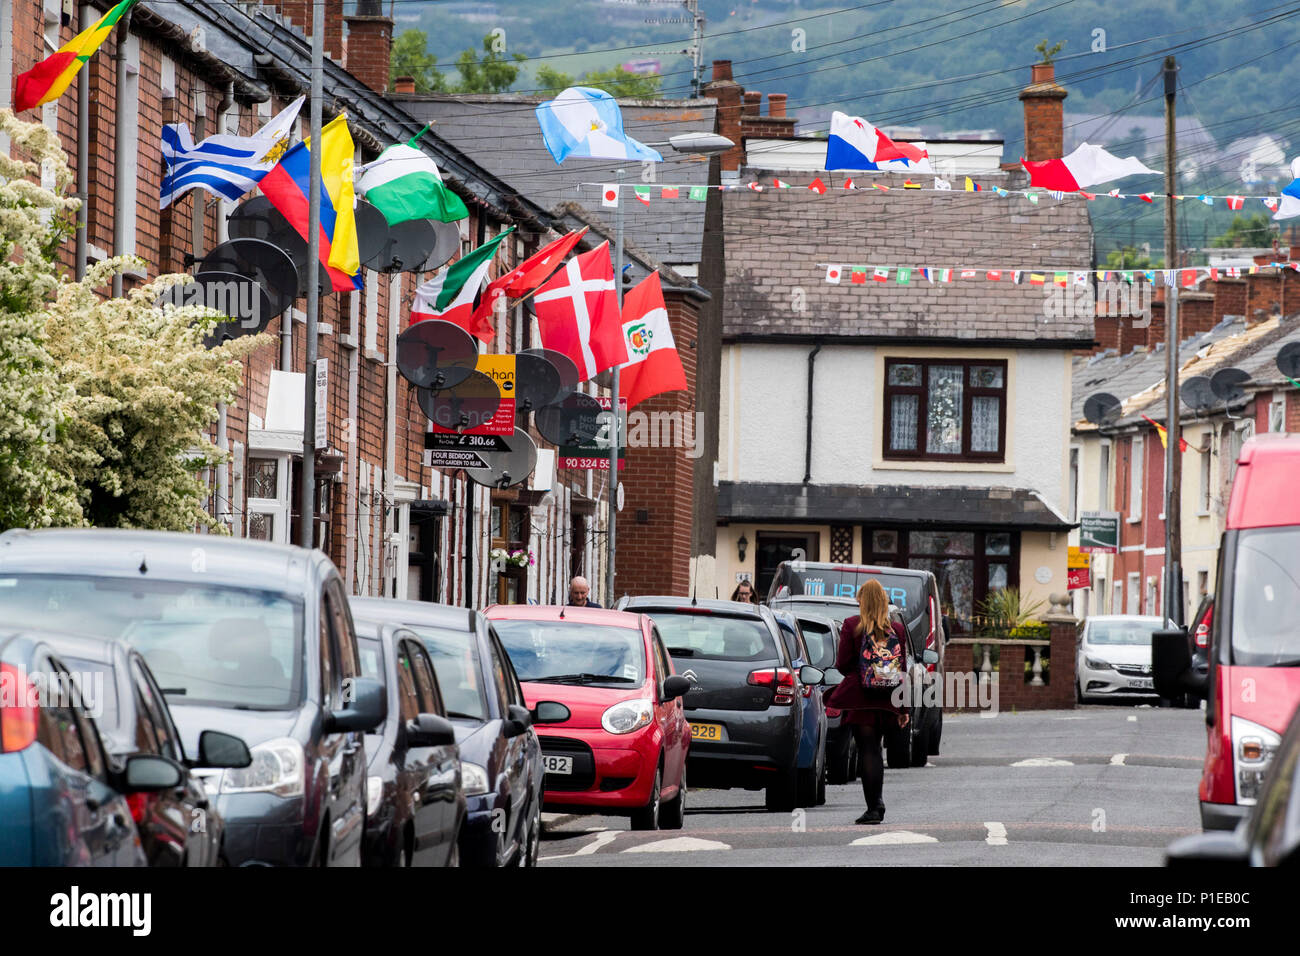 Iris Drive in West Belfast were residents have gotten into the World Cup fever and have created a sweepstakes to raise funds for a street party on the day of the World Cup Final. Stock Photo